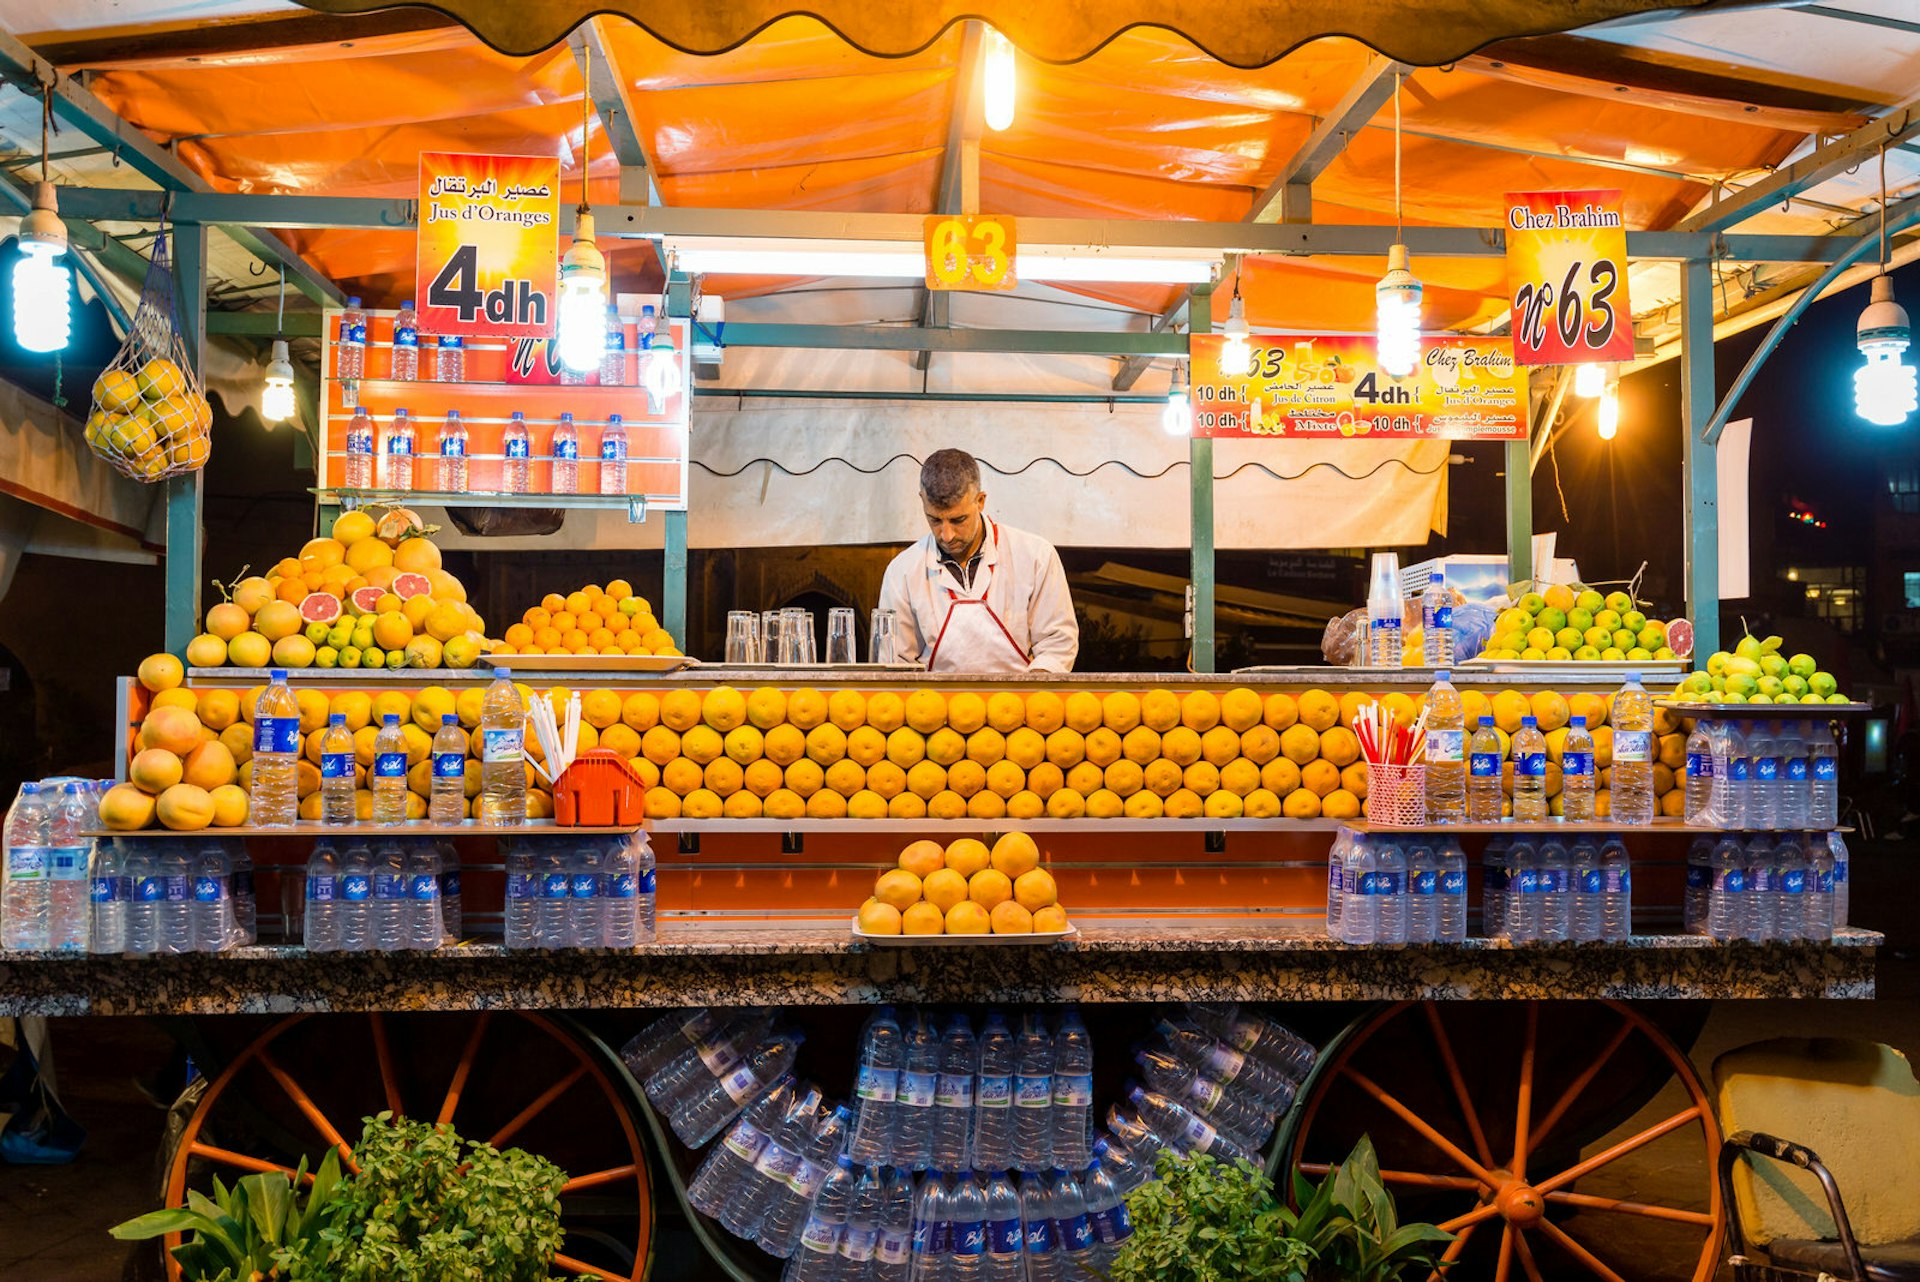 A man works on a stand selling orange juice in Djemaa El Fna square in central Marrakesh, Morocco